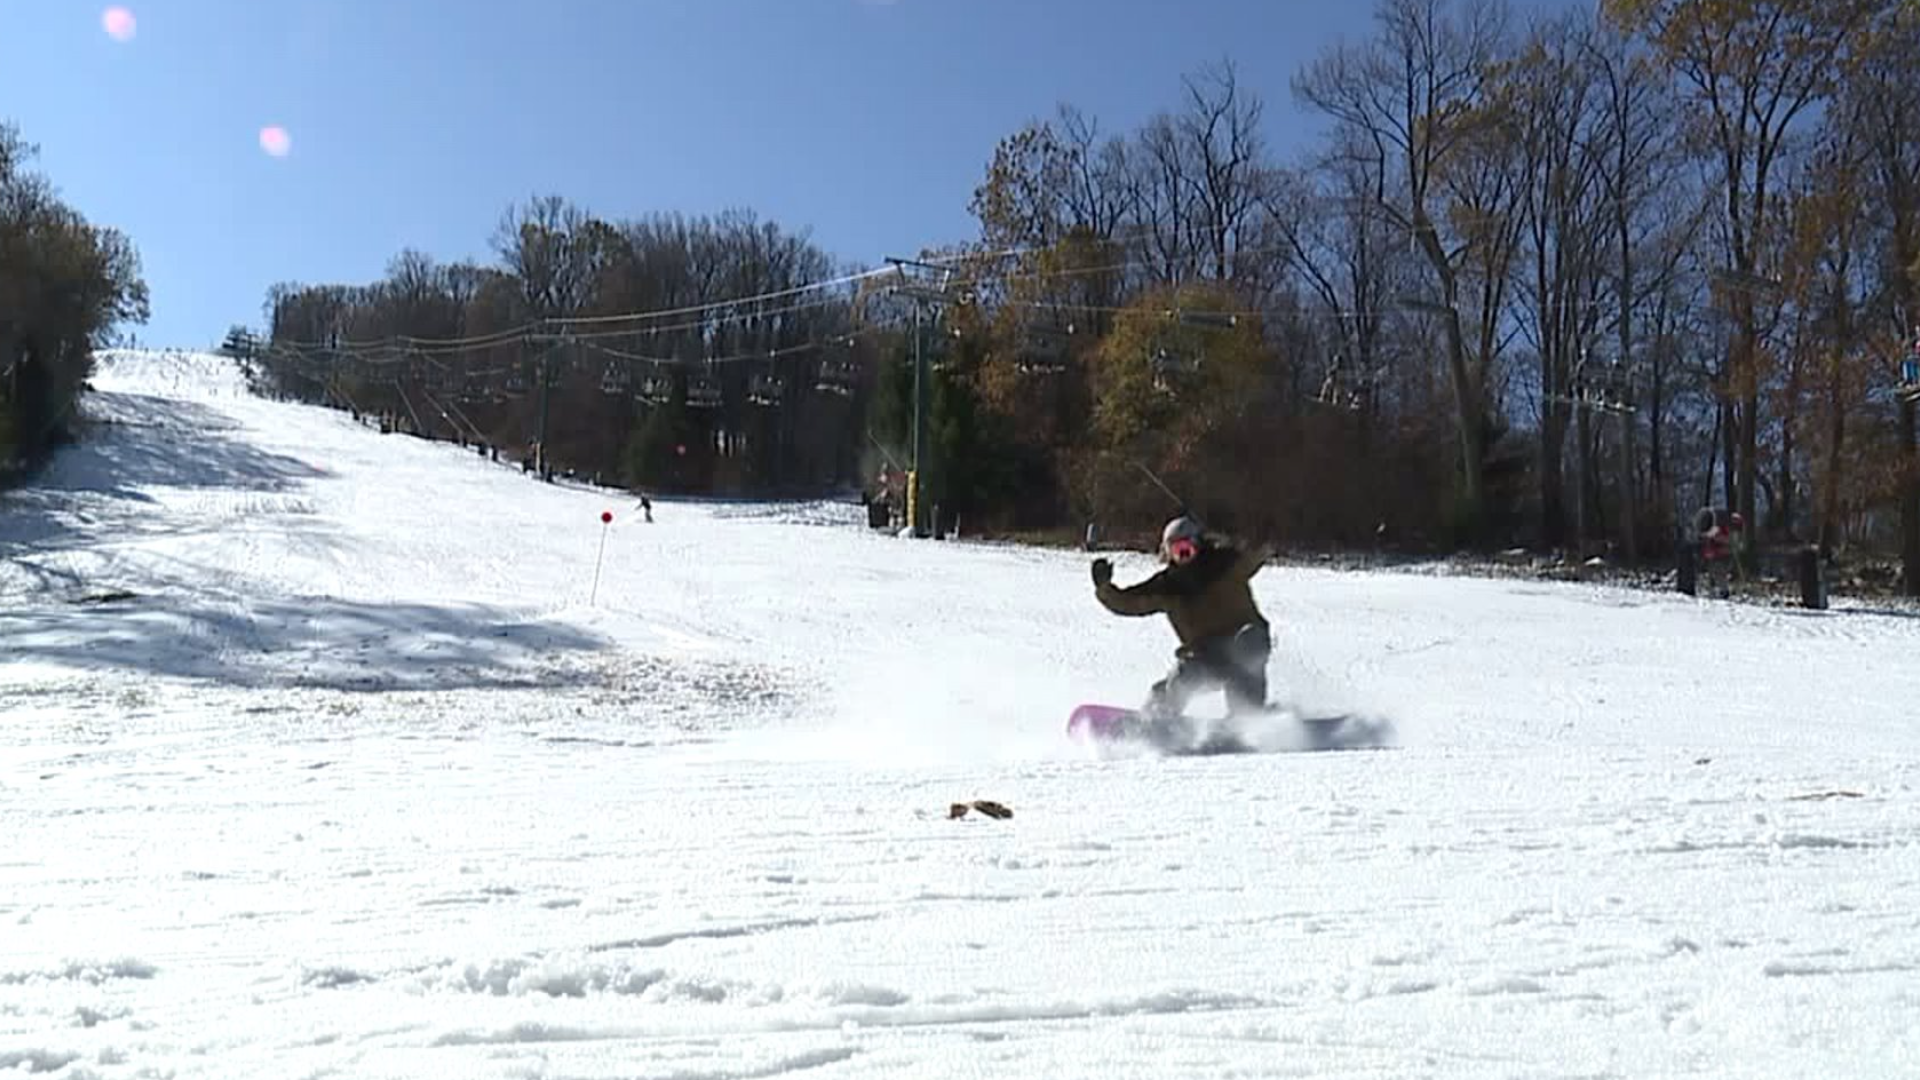 Roundtop Ski Resort opens for skiing and snowboarding